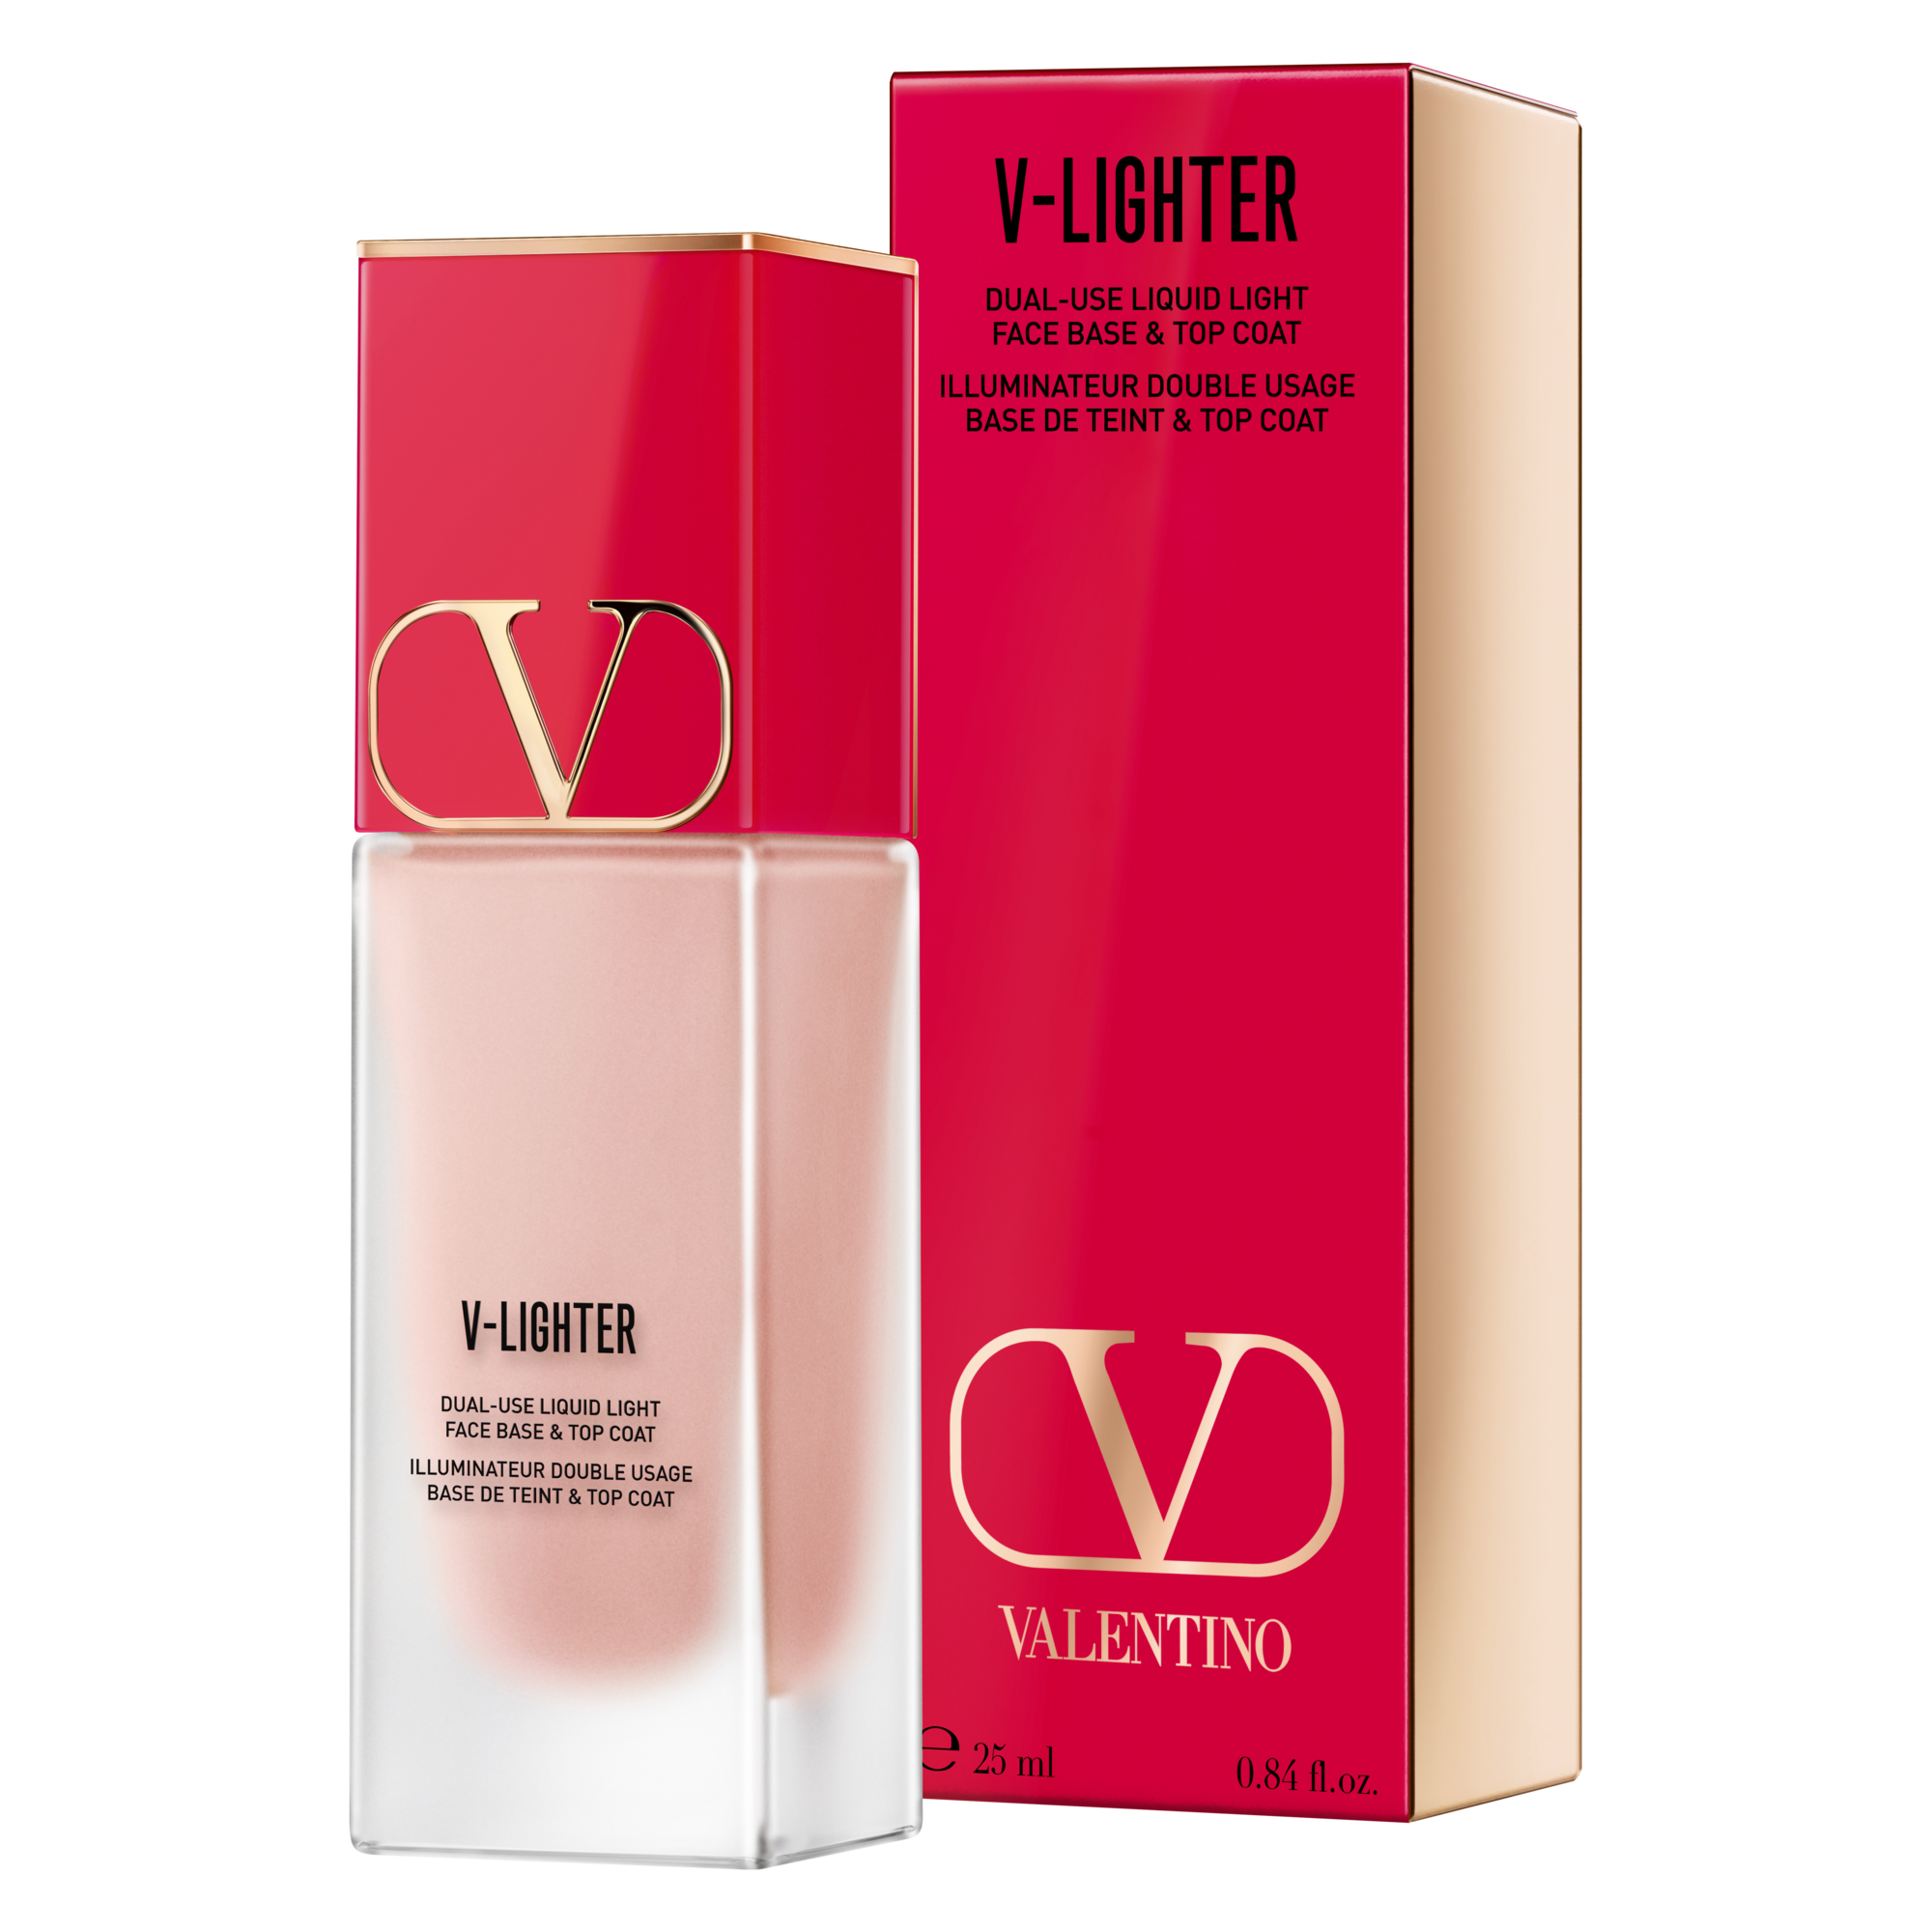 FREE Sample of Valentino Face Base Primer and Highlighter